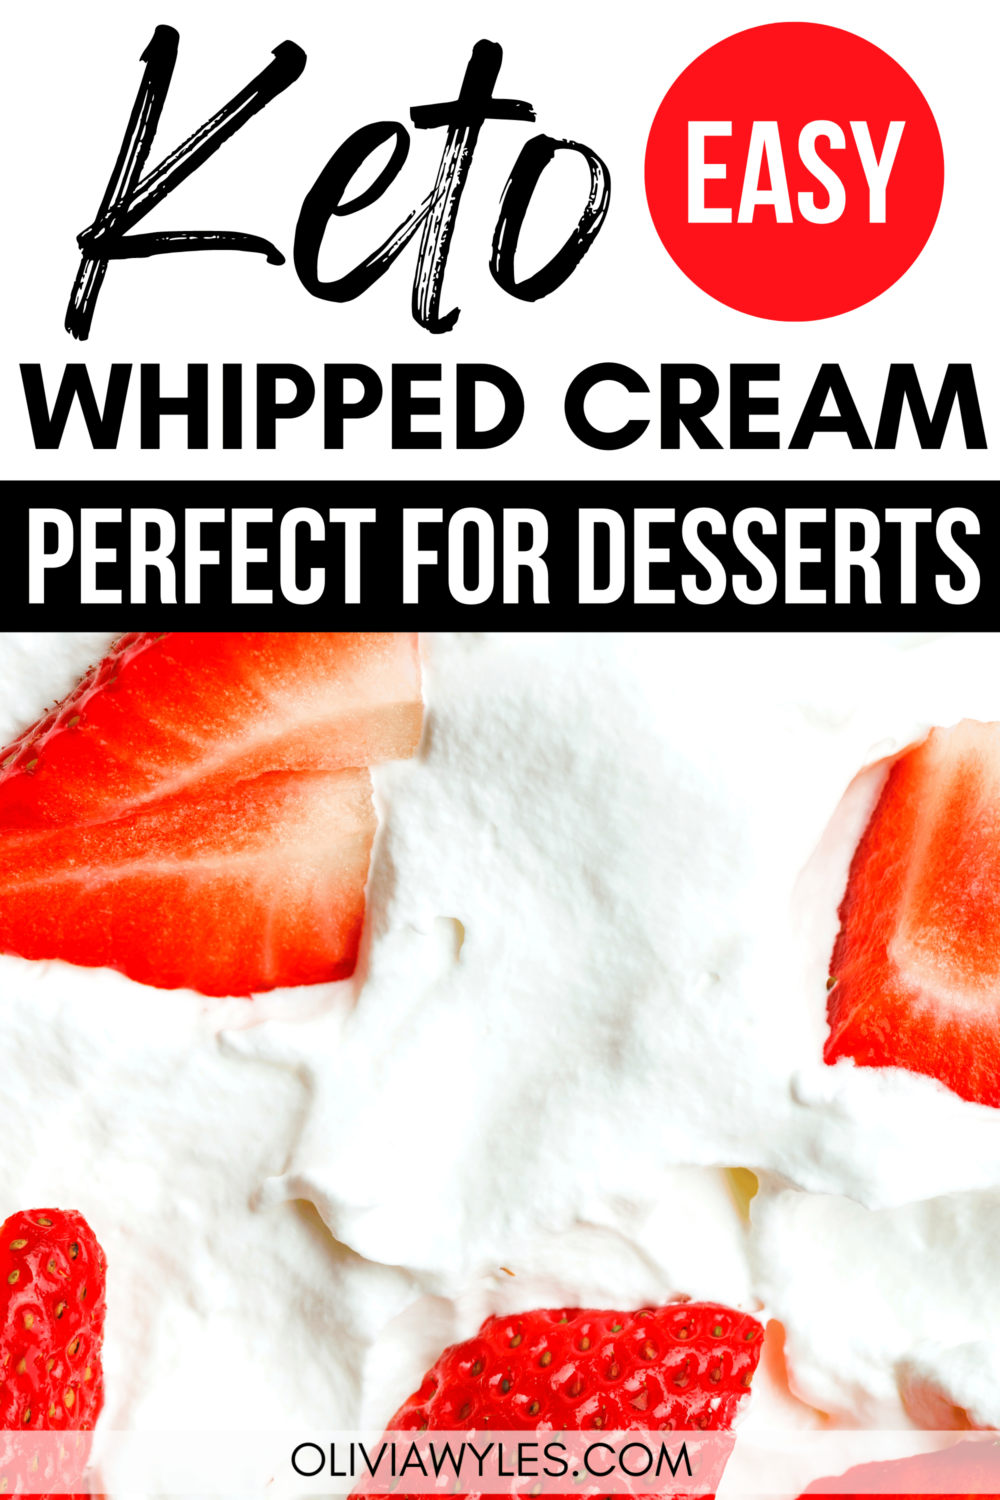 whipped cream and strawberries Pinterest pin image